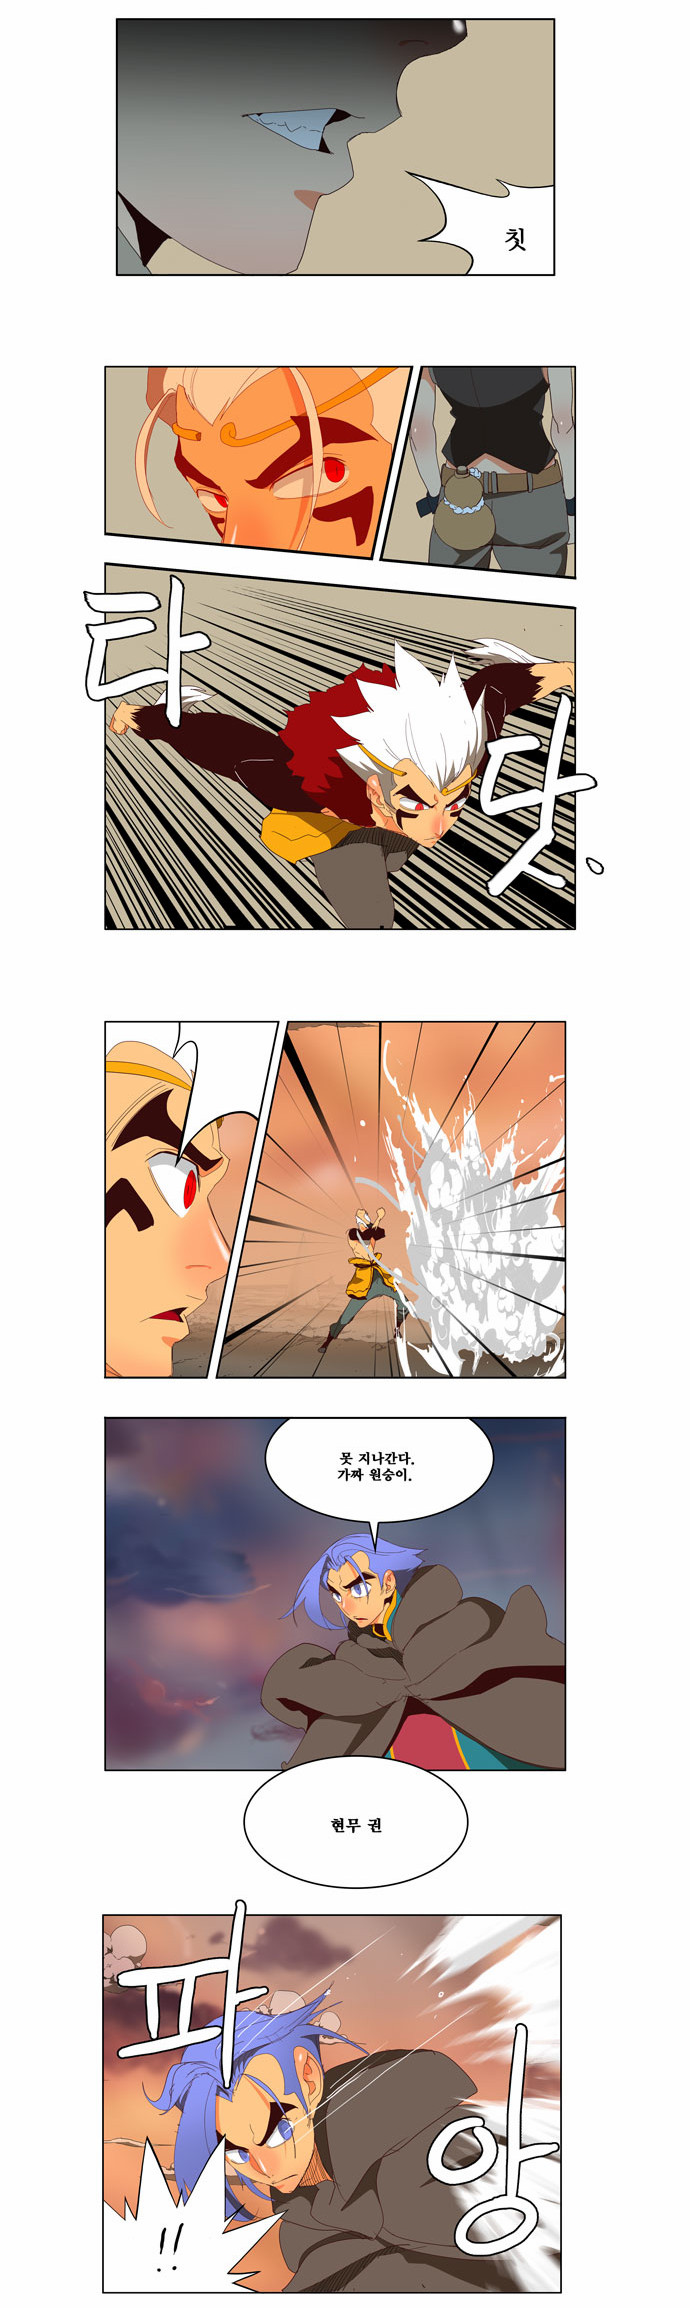 The God of High School - Chapter 147 - Page 2